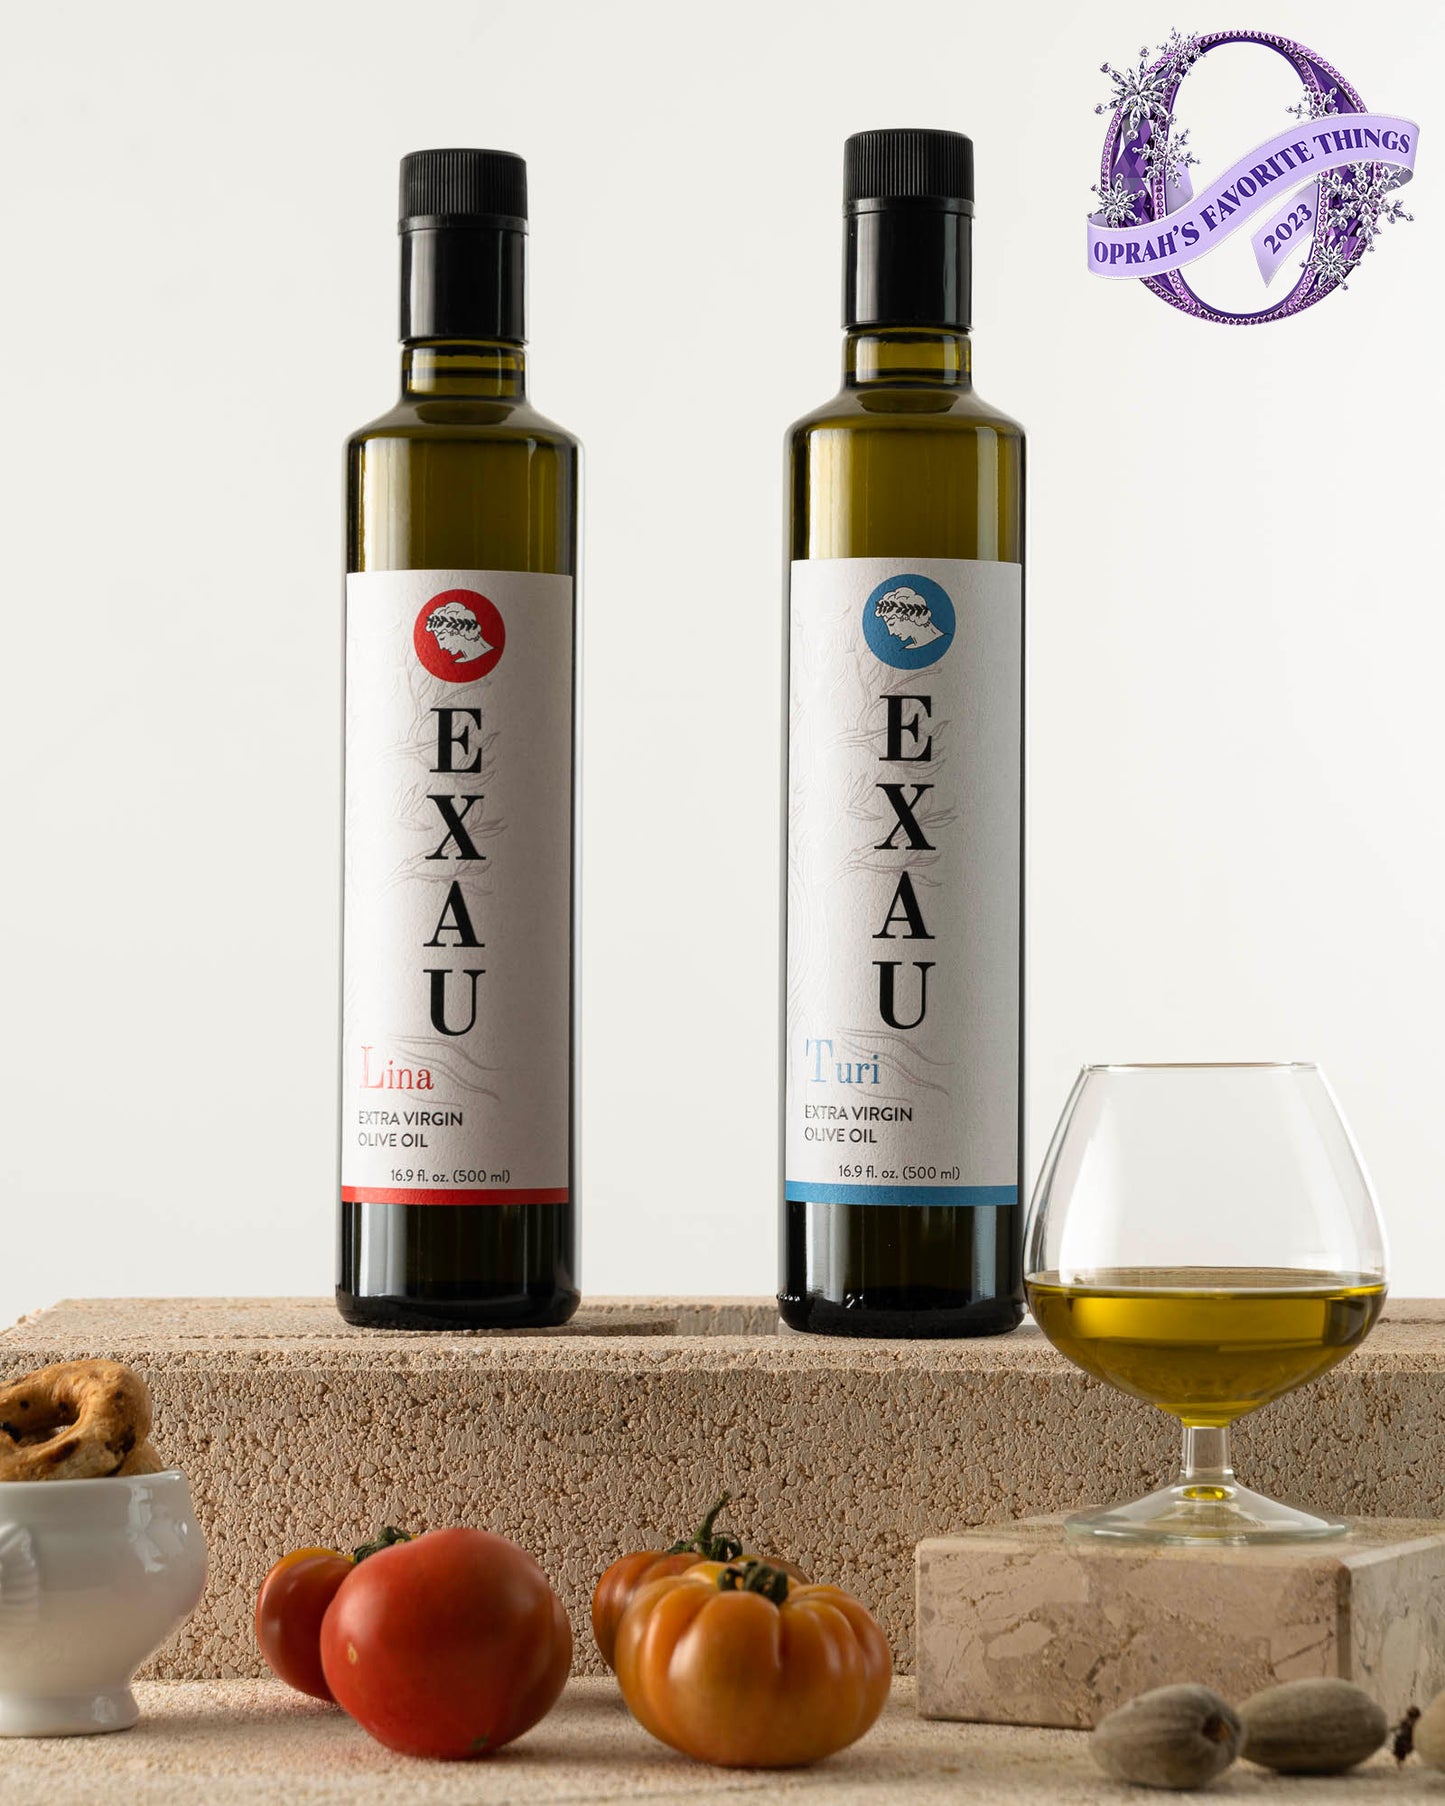 Due2 Olive Oil Holiday Gift Set - Oprah's Favorite Things – EXAU